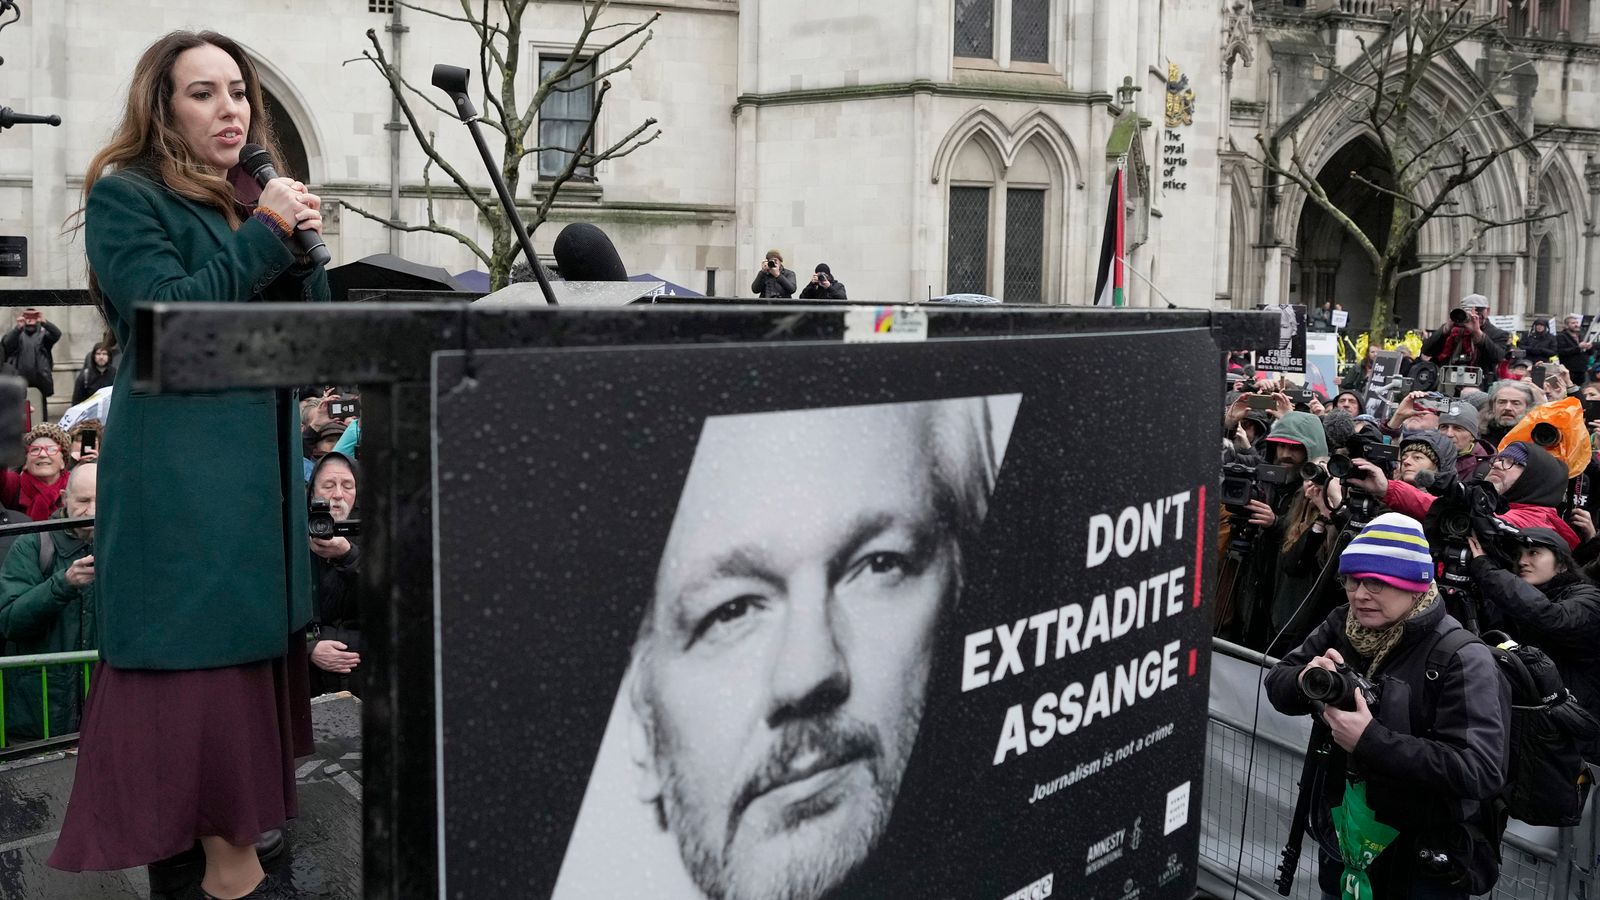 Julian Assange's wife calls on Biden to 'do right thing' as supporters mark five years since he was taken to prison